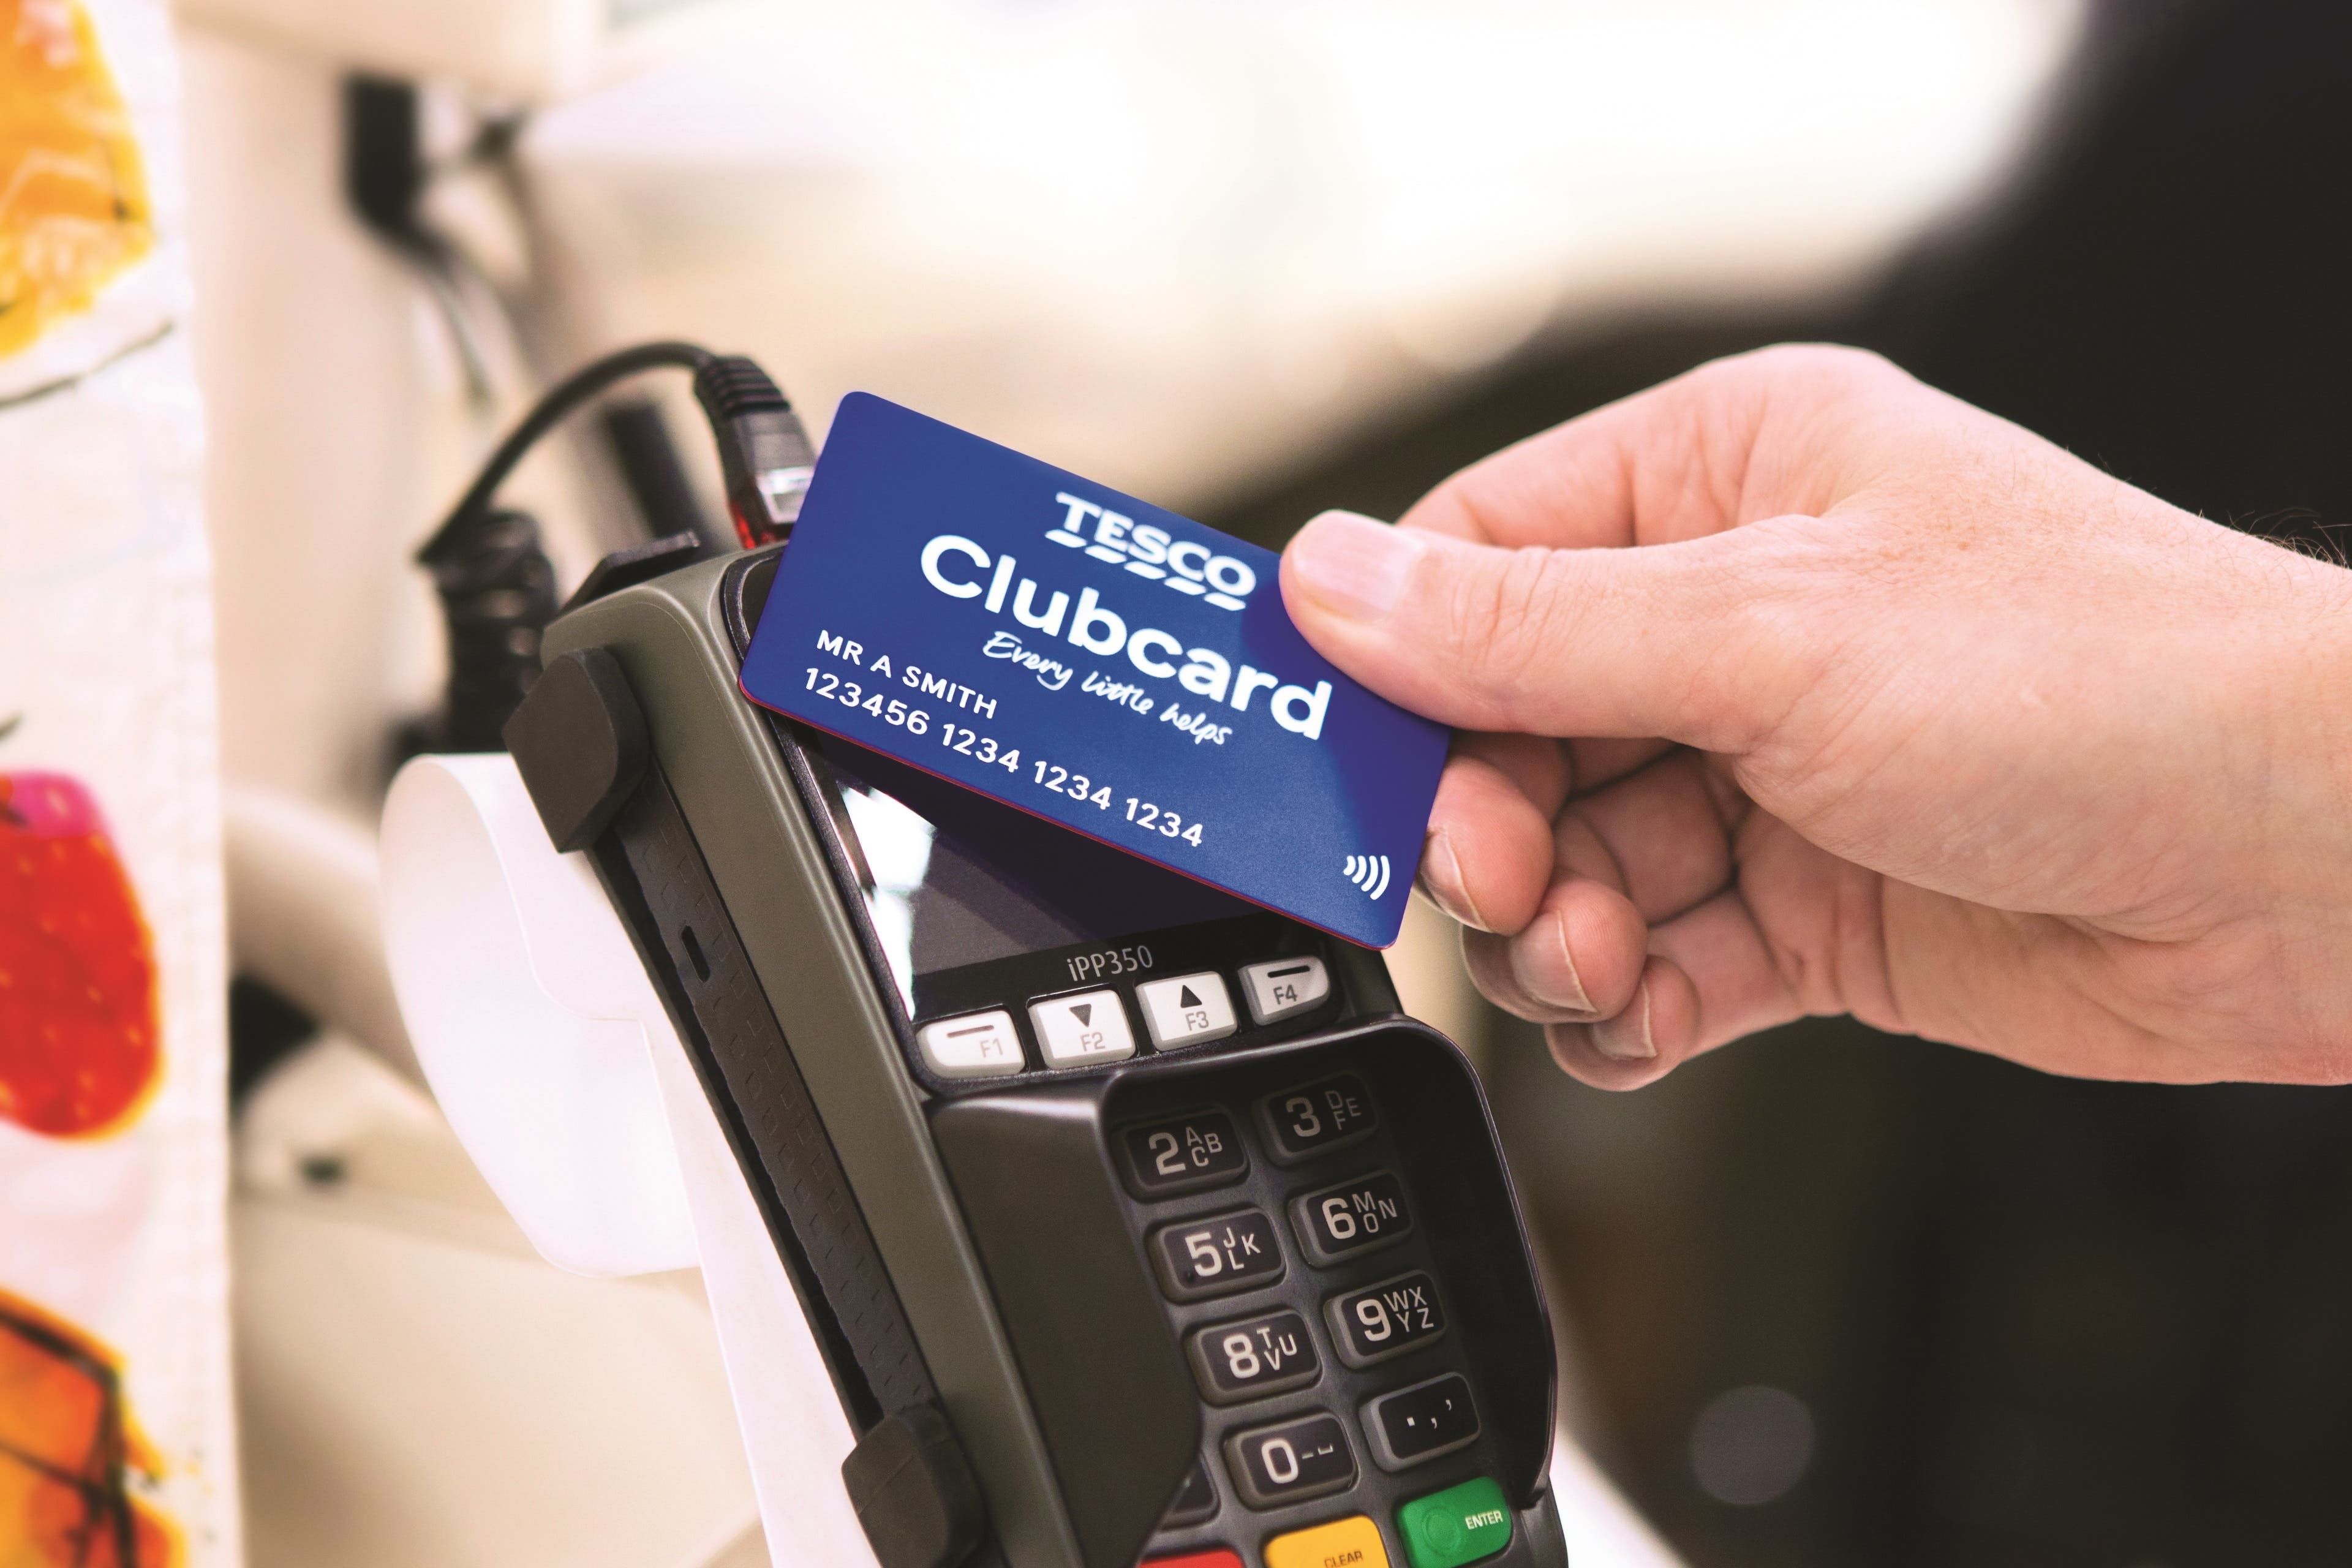 Tesco said its Clubcard points will now be worth twice their value when customers cash them in, rather than three times